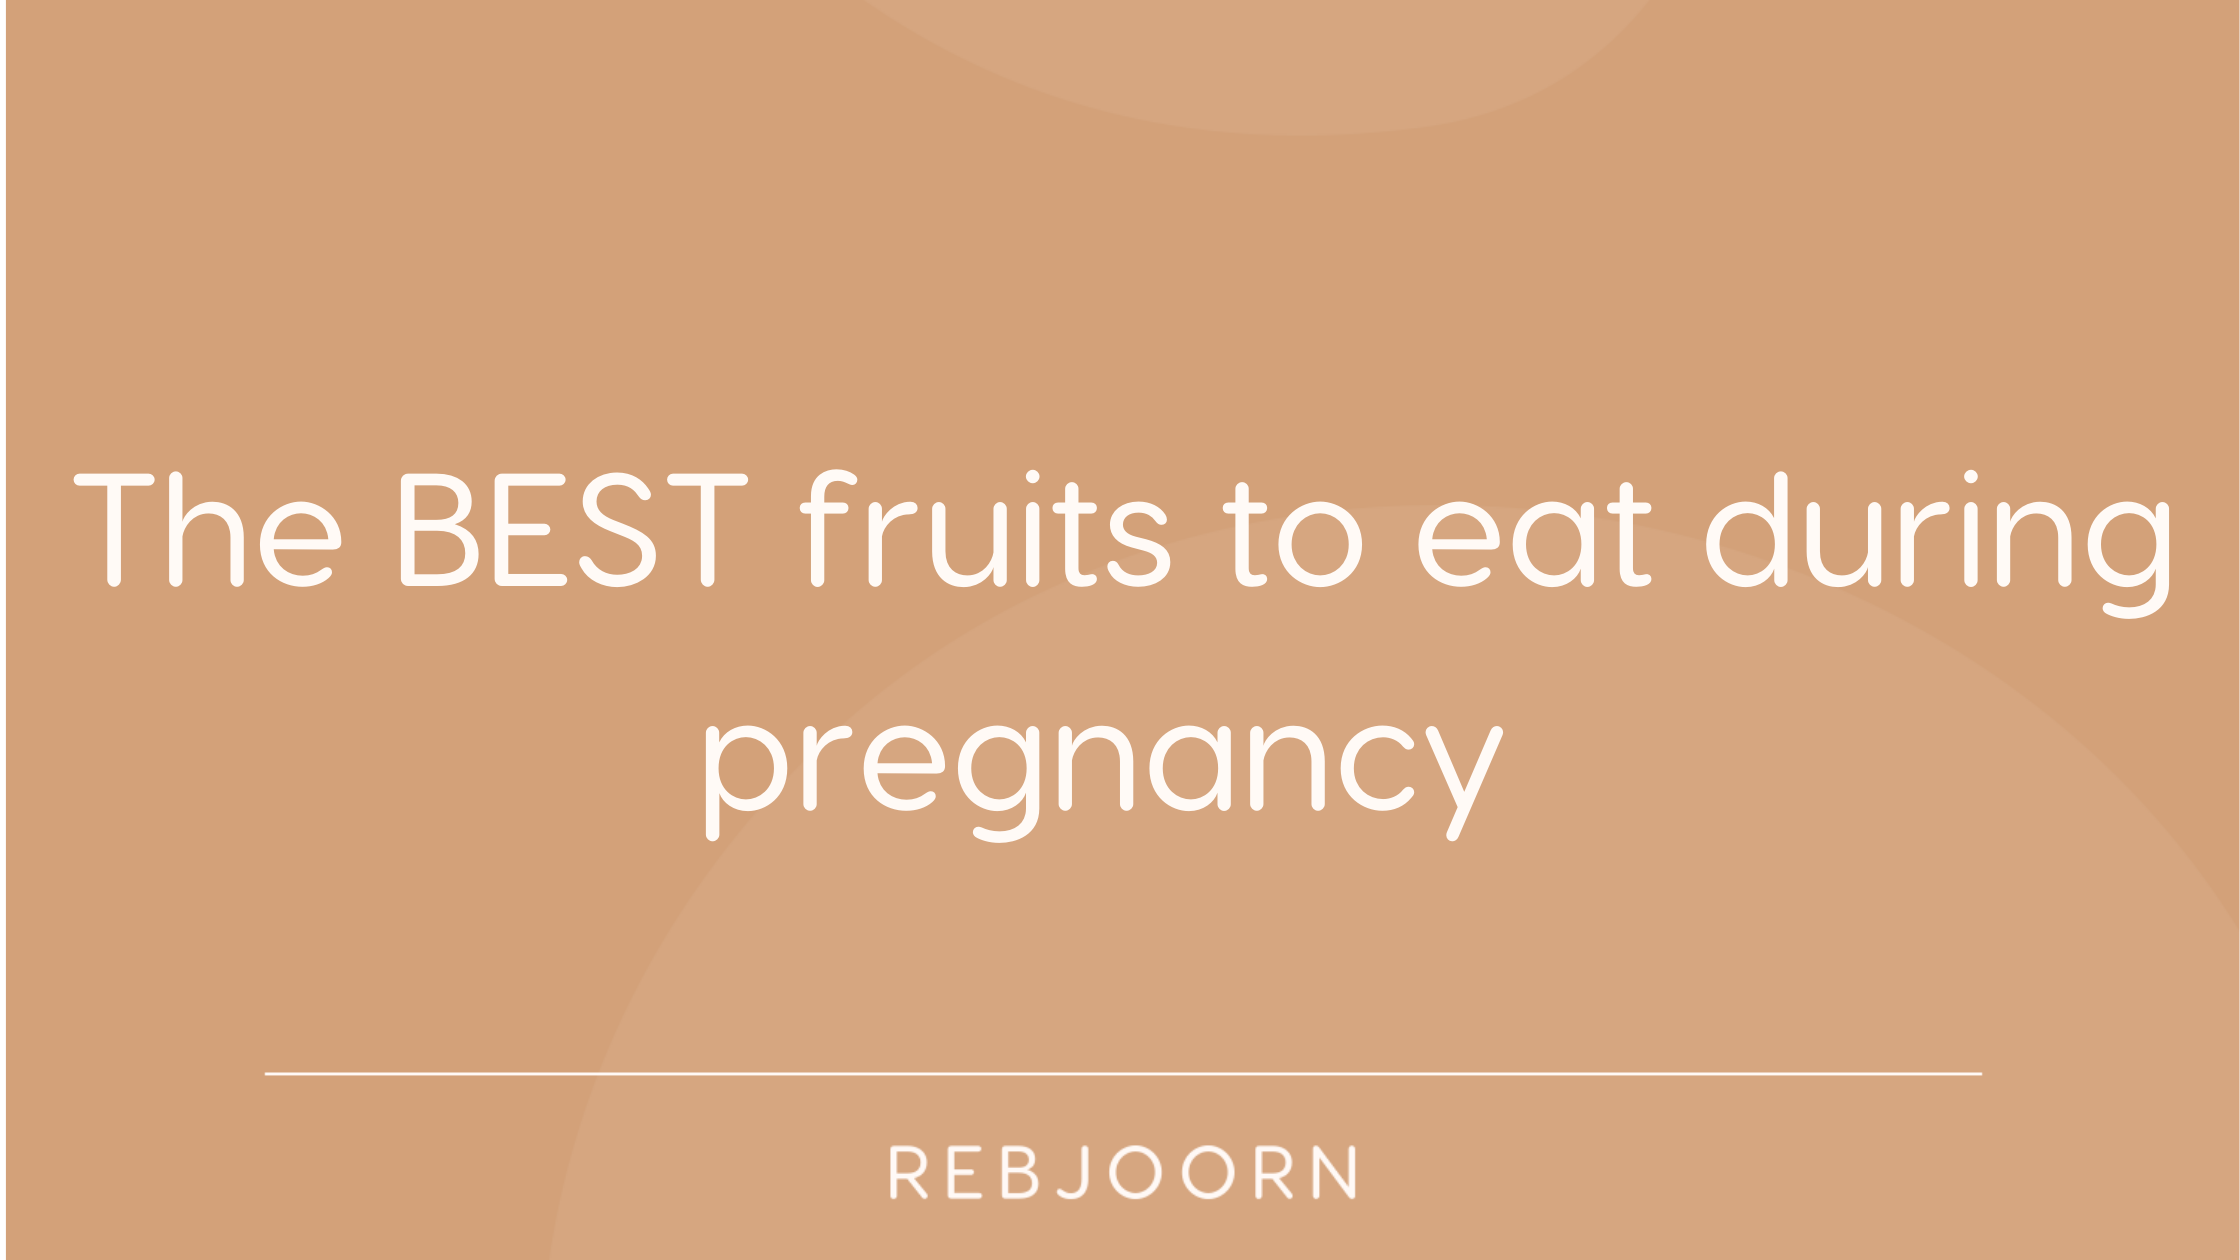 The BEST fruits to eat during pregnancy